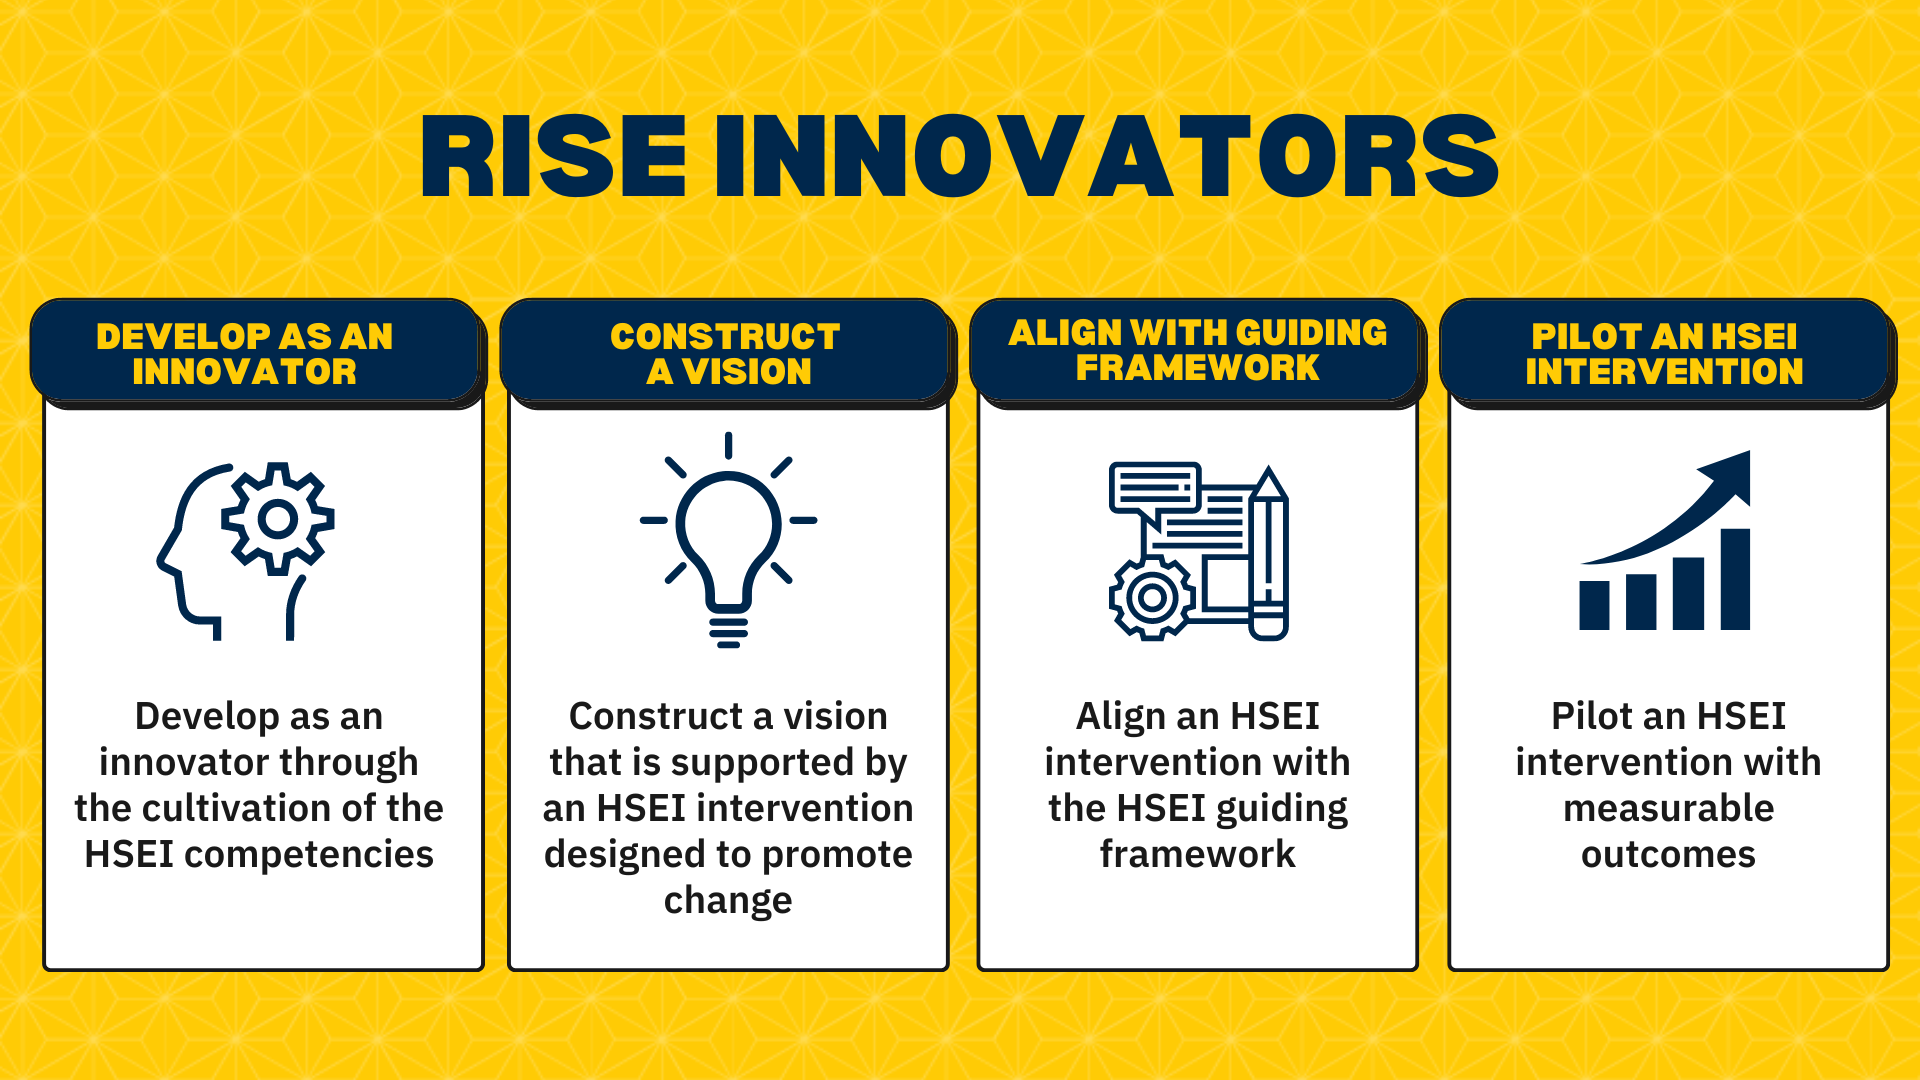 RISE Innovators Construct a vision that is well-supported by education interventions designed to lead to intended change; Develop as an innovator through the cultivation of the seven health science education innovation (HSEI) competencies; Align an innovation within the HSEI guiding framework; and Pilot an innovation with measurable outcomes.